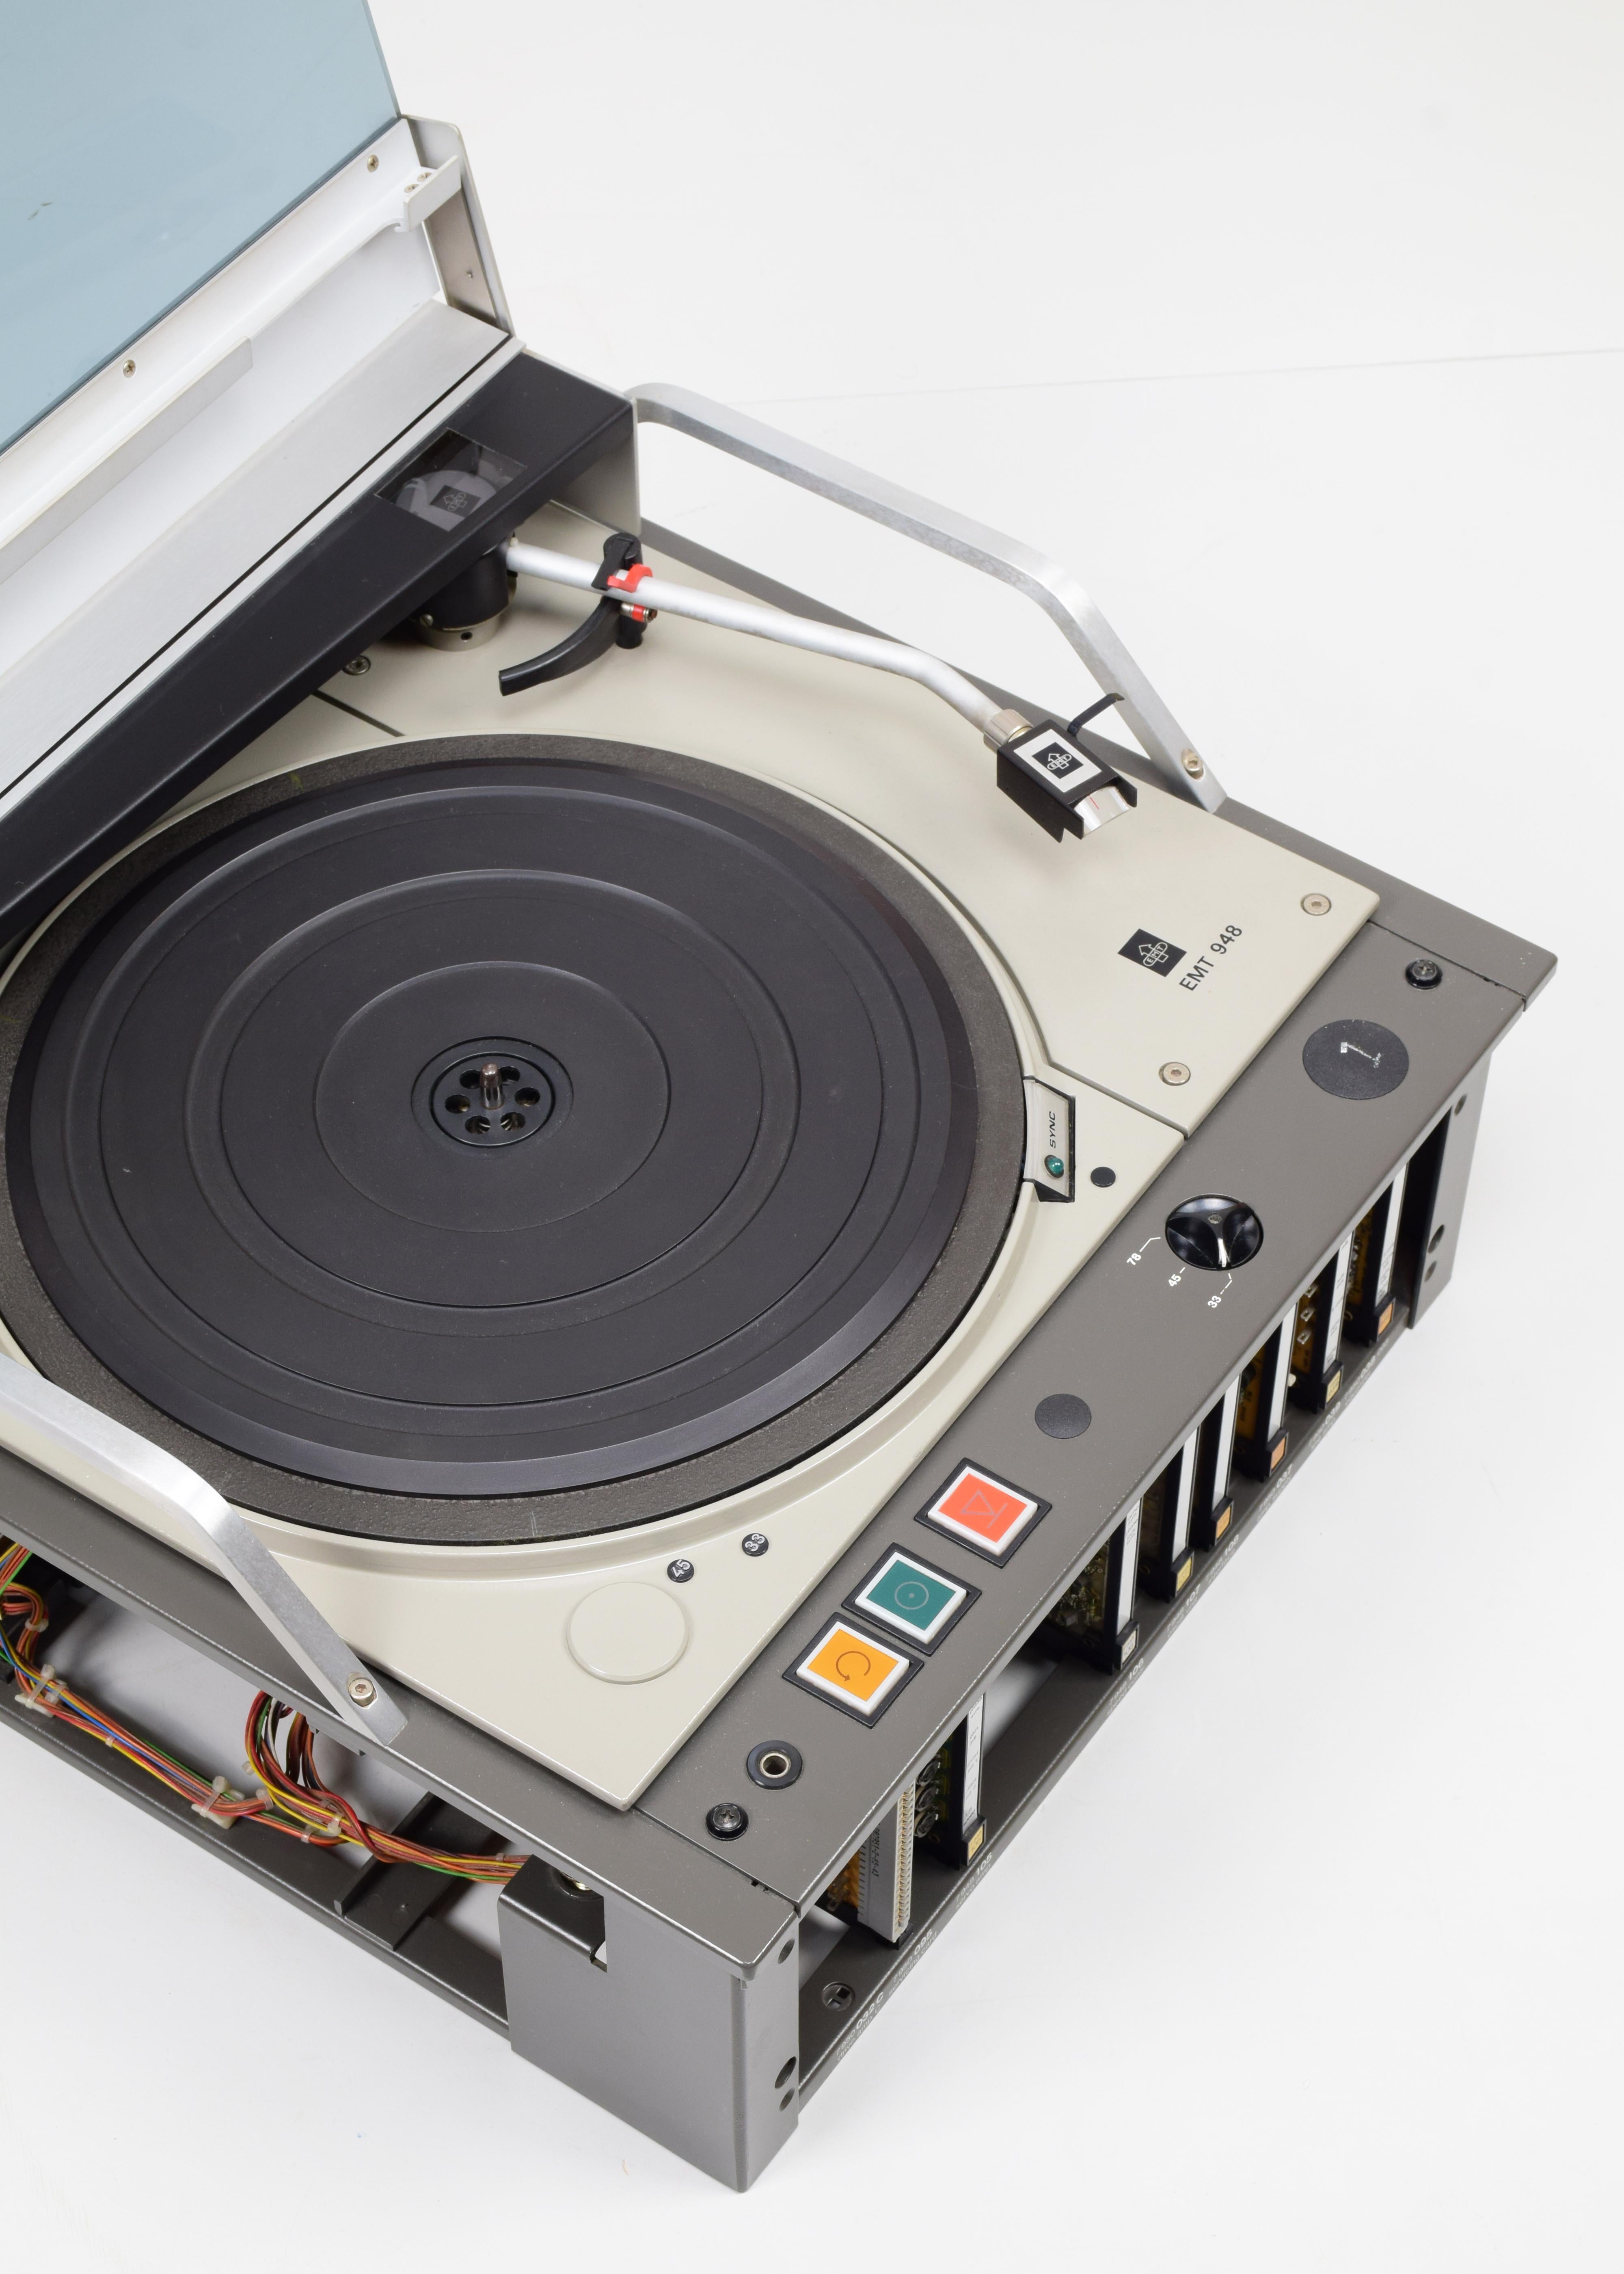 Emt 948 Turntable. Superb, Complete and Ready to Use, Looks and Sounds Fantastic 5